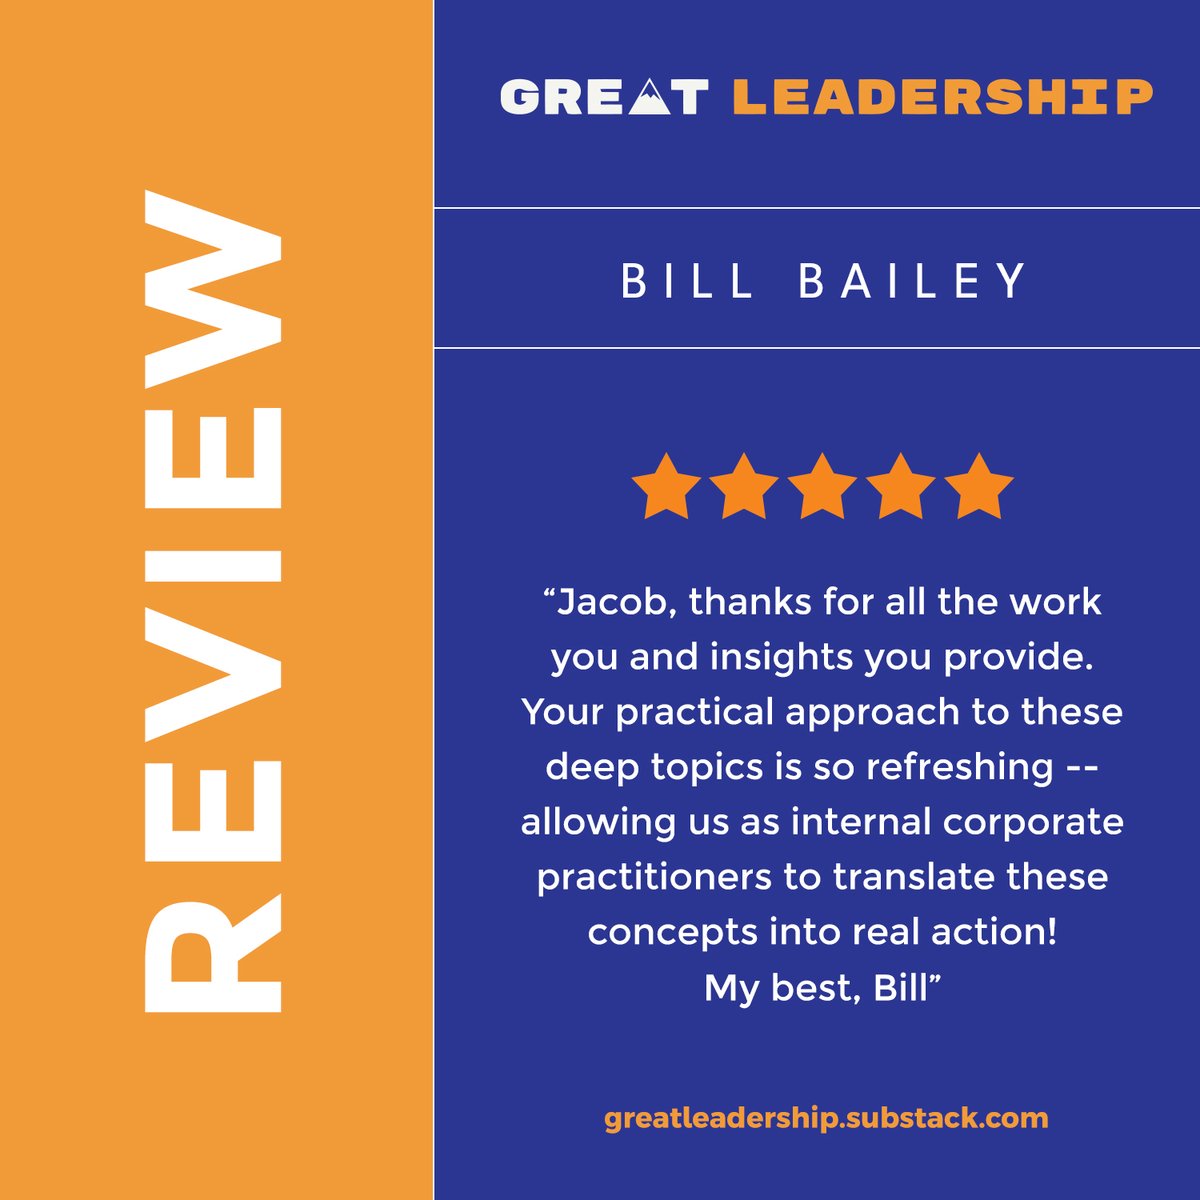 Big thanks to Bill Bailey, Senior Vice President - Global Talent and Learning at Sompo International., for the feedback on my Substack! Happy to know that our content is hitting the mark and sparking real changes in the business world. Your support is everything. Thank you!